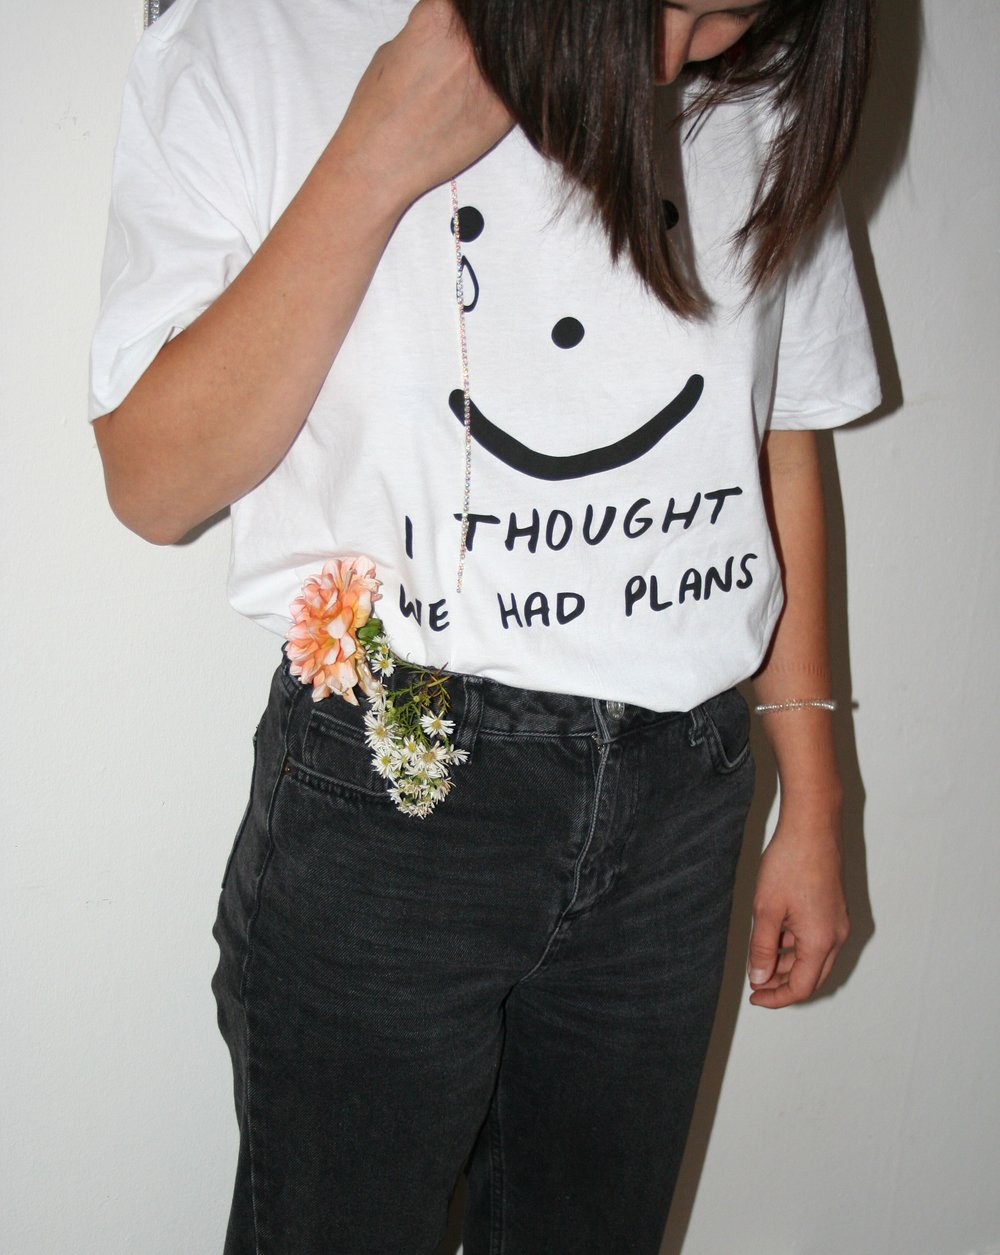 I THOUGHT WE HAD PLANS T SHIRT 